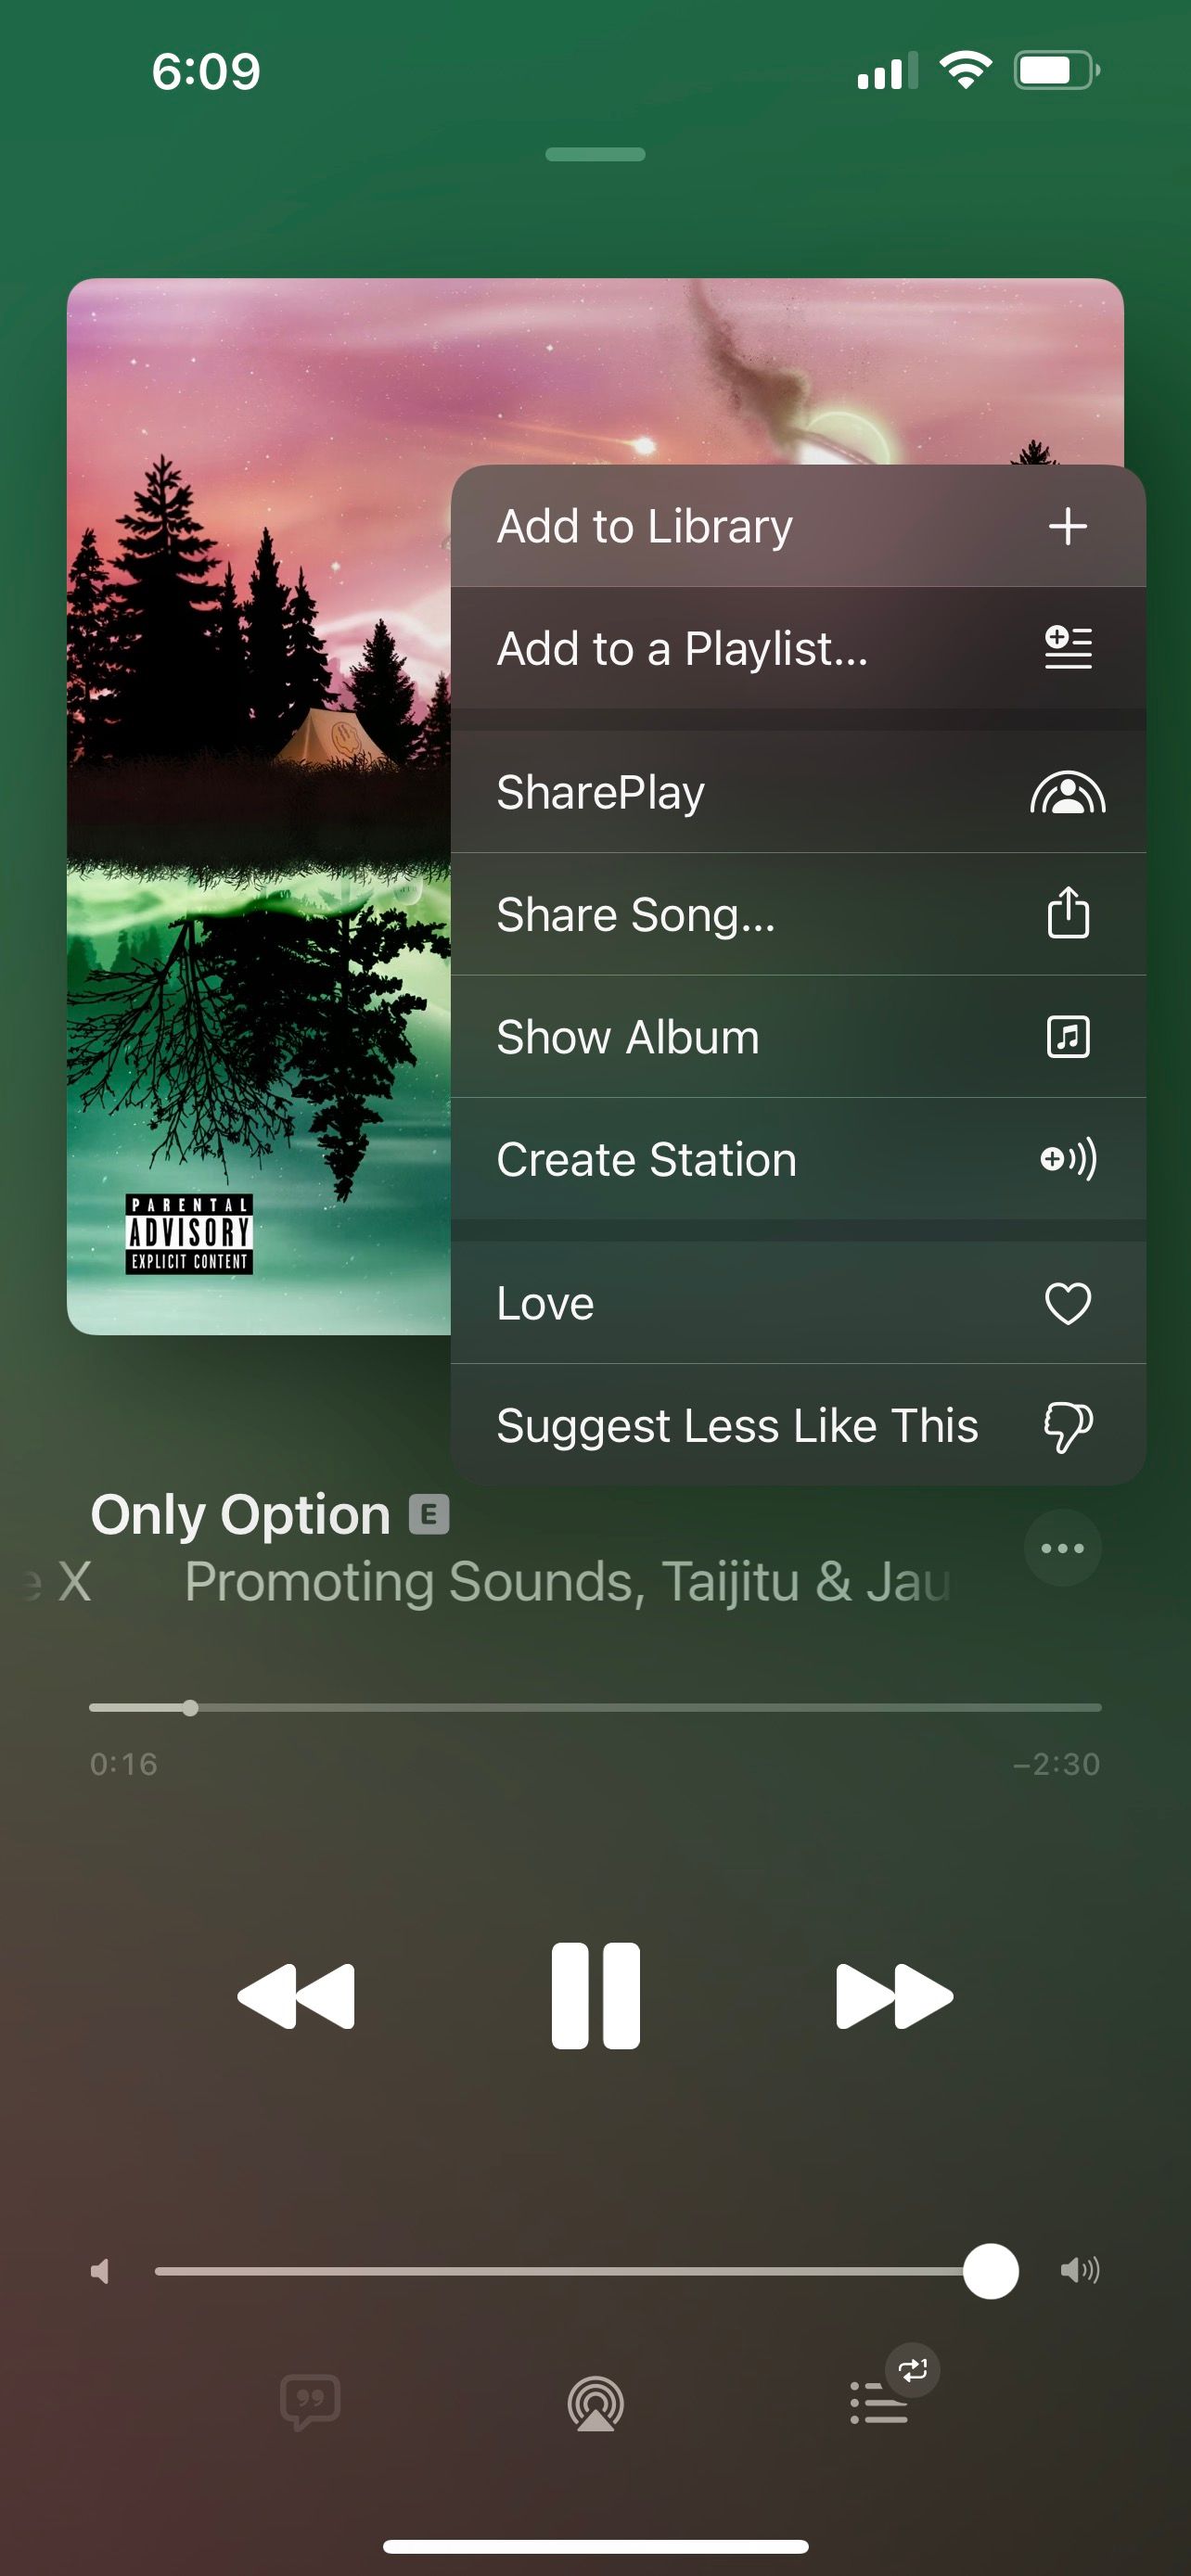 Add song to library in Apple Music